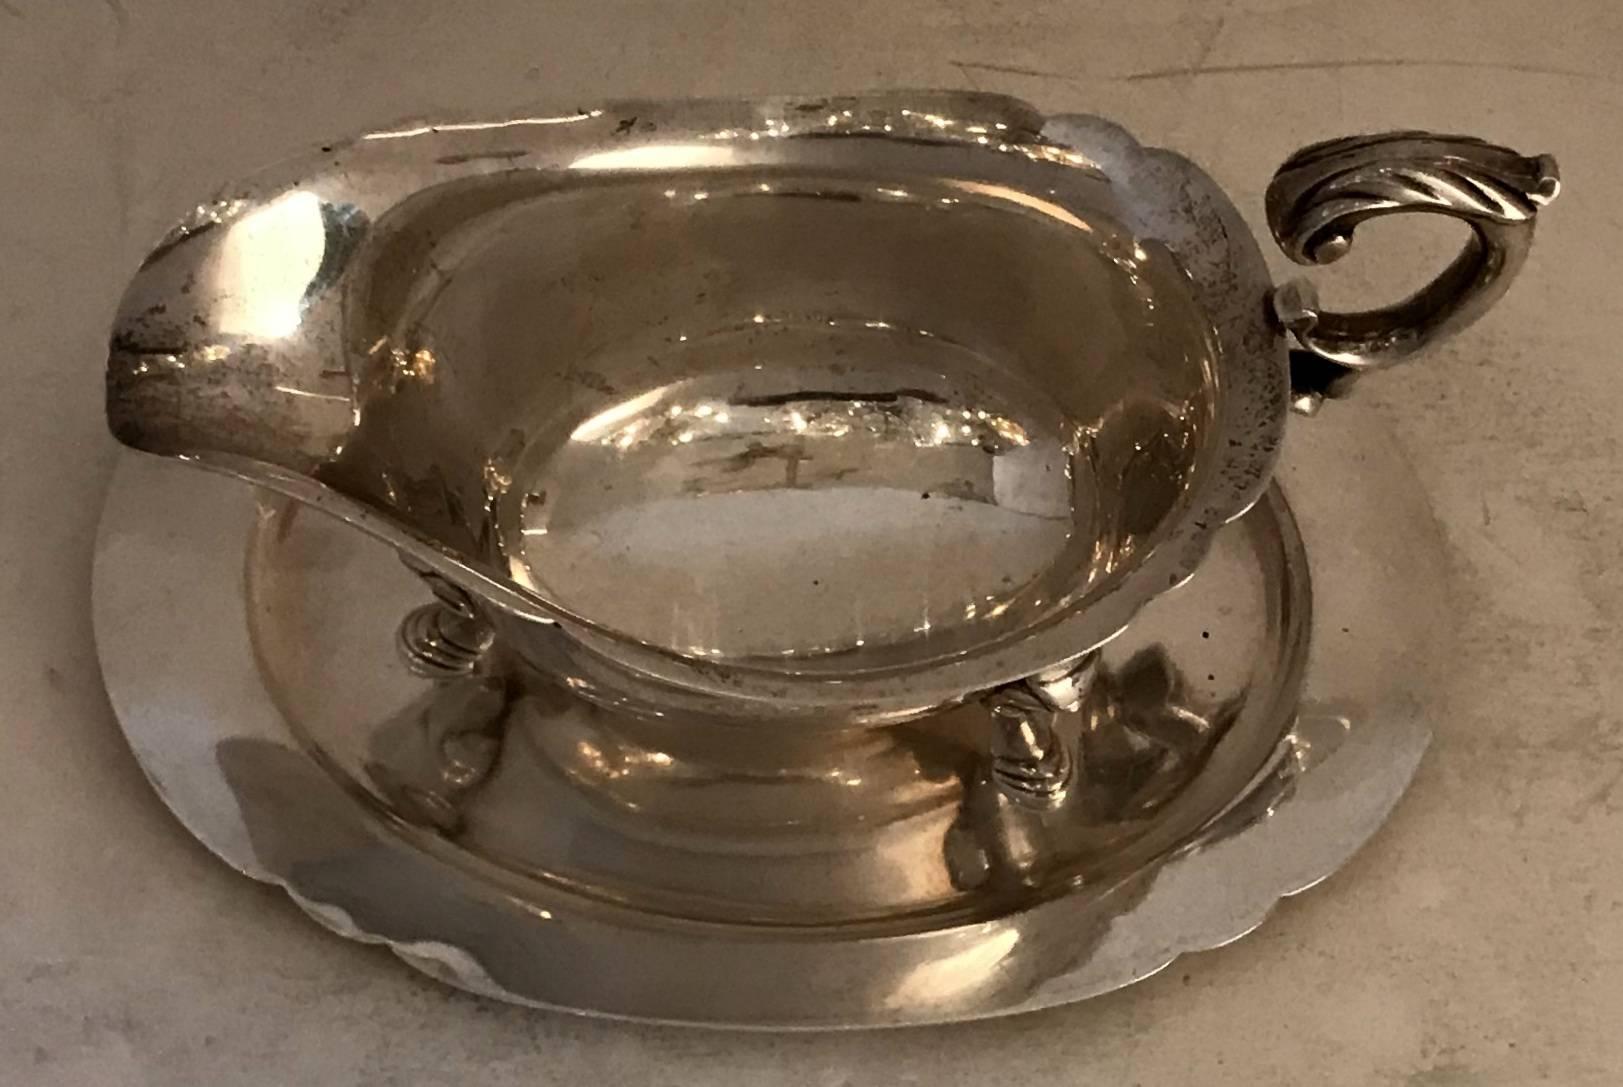 A wonderful sterling silver Tiffany & Co gravy boat and tray with scalloped edge and ornate handle.
No monogram, each is engraved on the bottom:
Tiffany & Co. sterling silver
22105 M